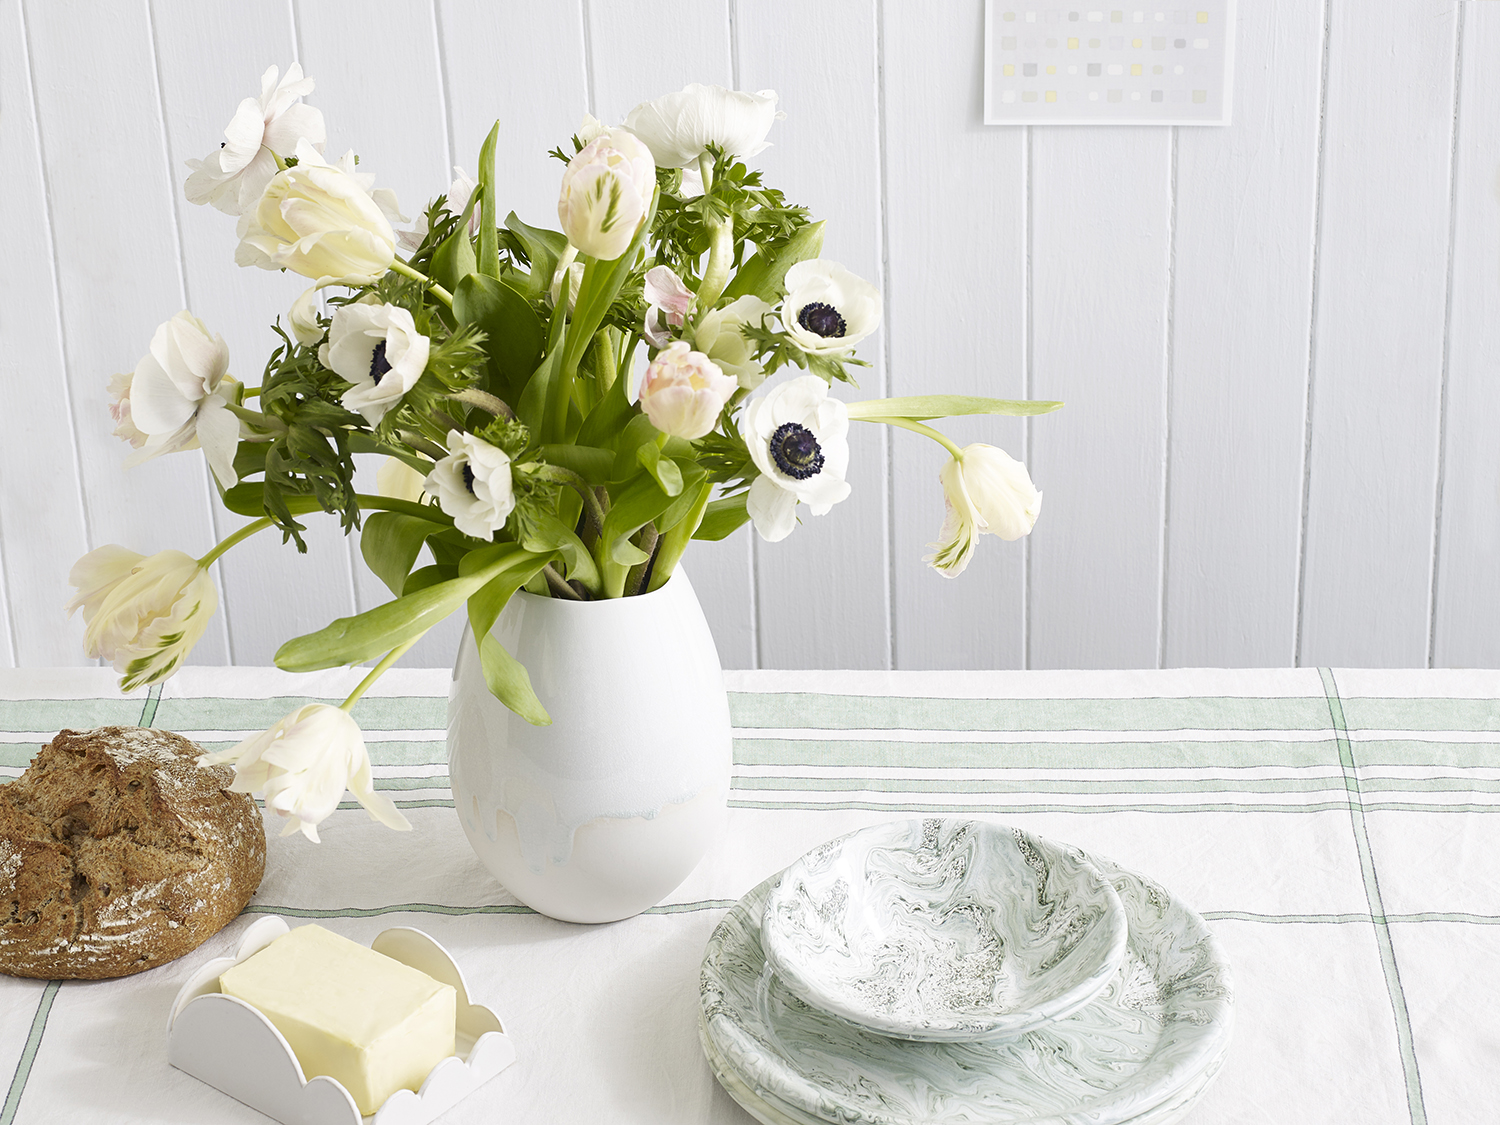 Spring flower styling and indie homeware products